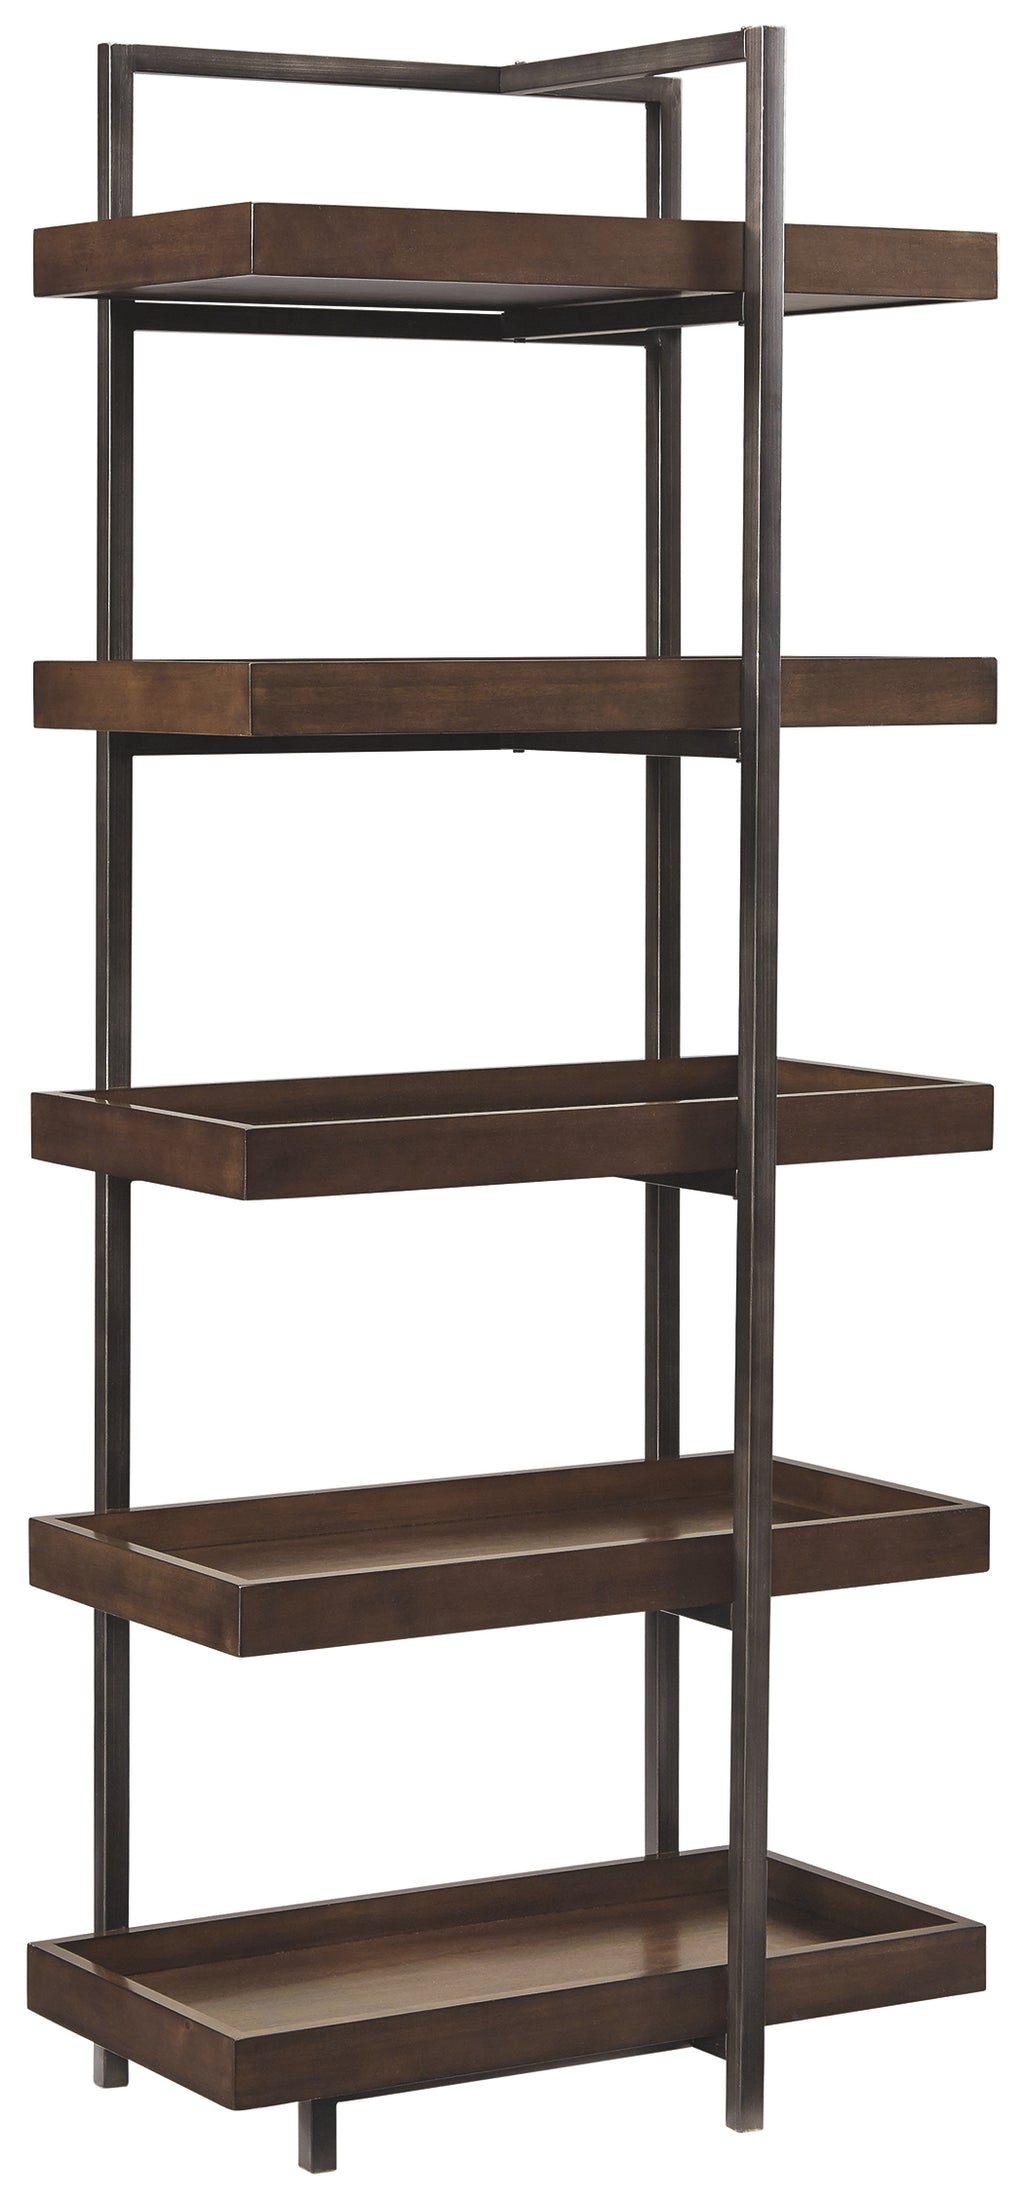 Starmore W633-34 BrownGunmetal Left or Right Pier